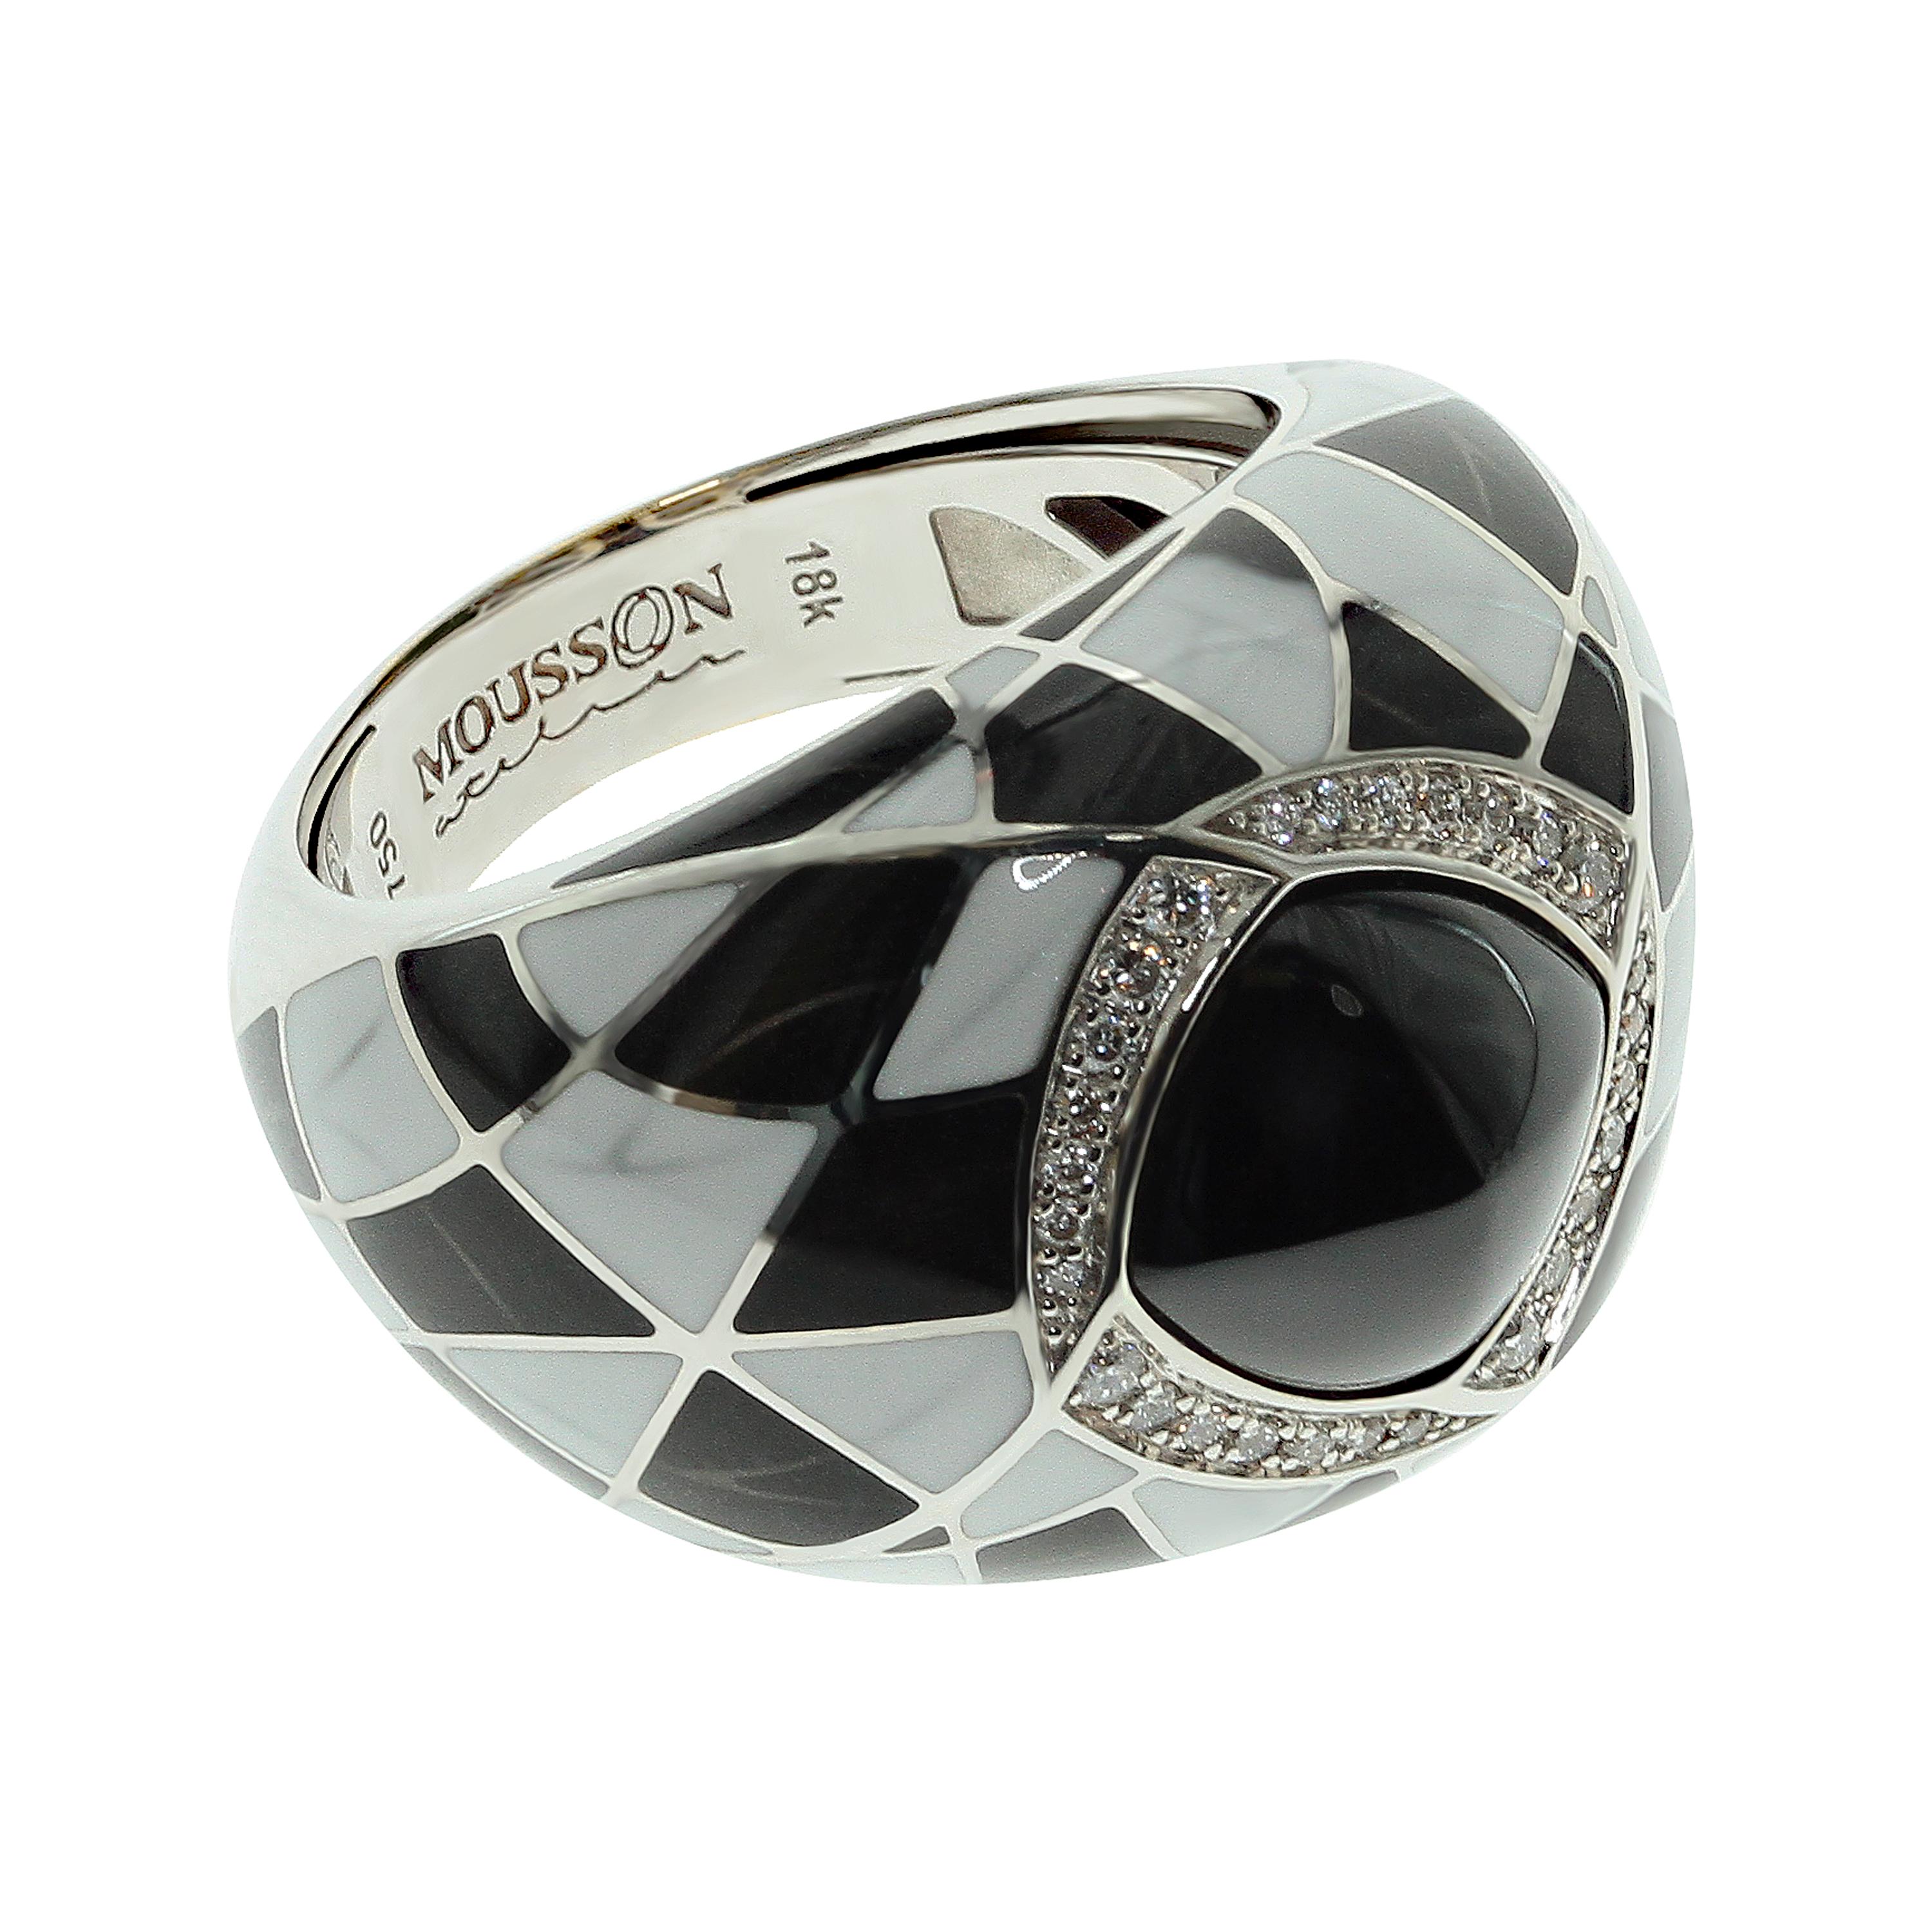 Black Spinel Diamond Enamel 18 Karat White Gold Ring

Contrast black and white pattern looks like mysterious chessboard. Meet Mad Hatter and White Rabbit. Feel yourself like Alice from Wonderland. 

US Size 7 3/4
EU Size 55 7/8

24.5x17.3 mm
11.48 gm